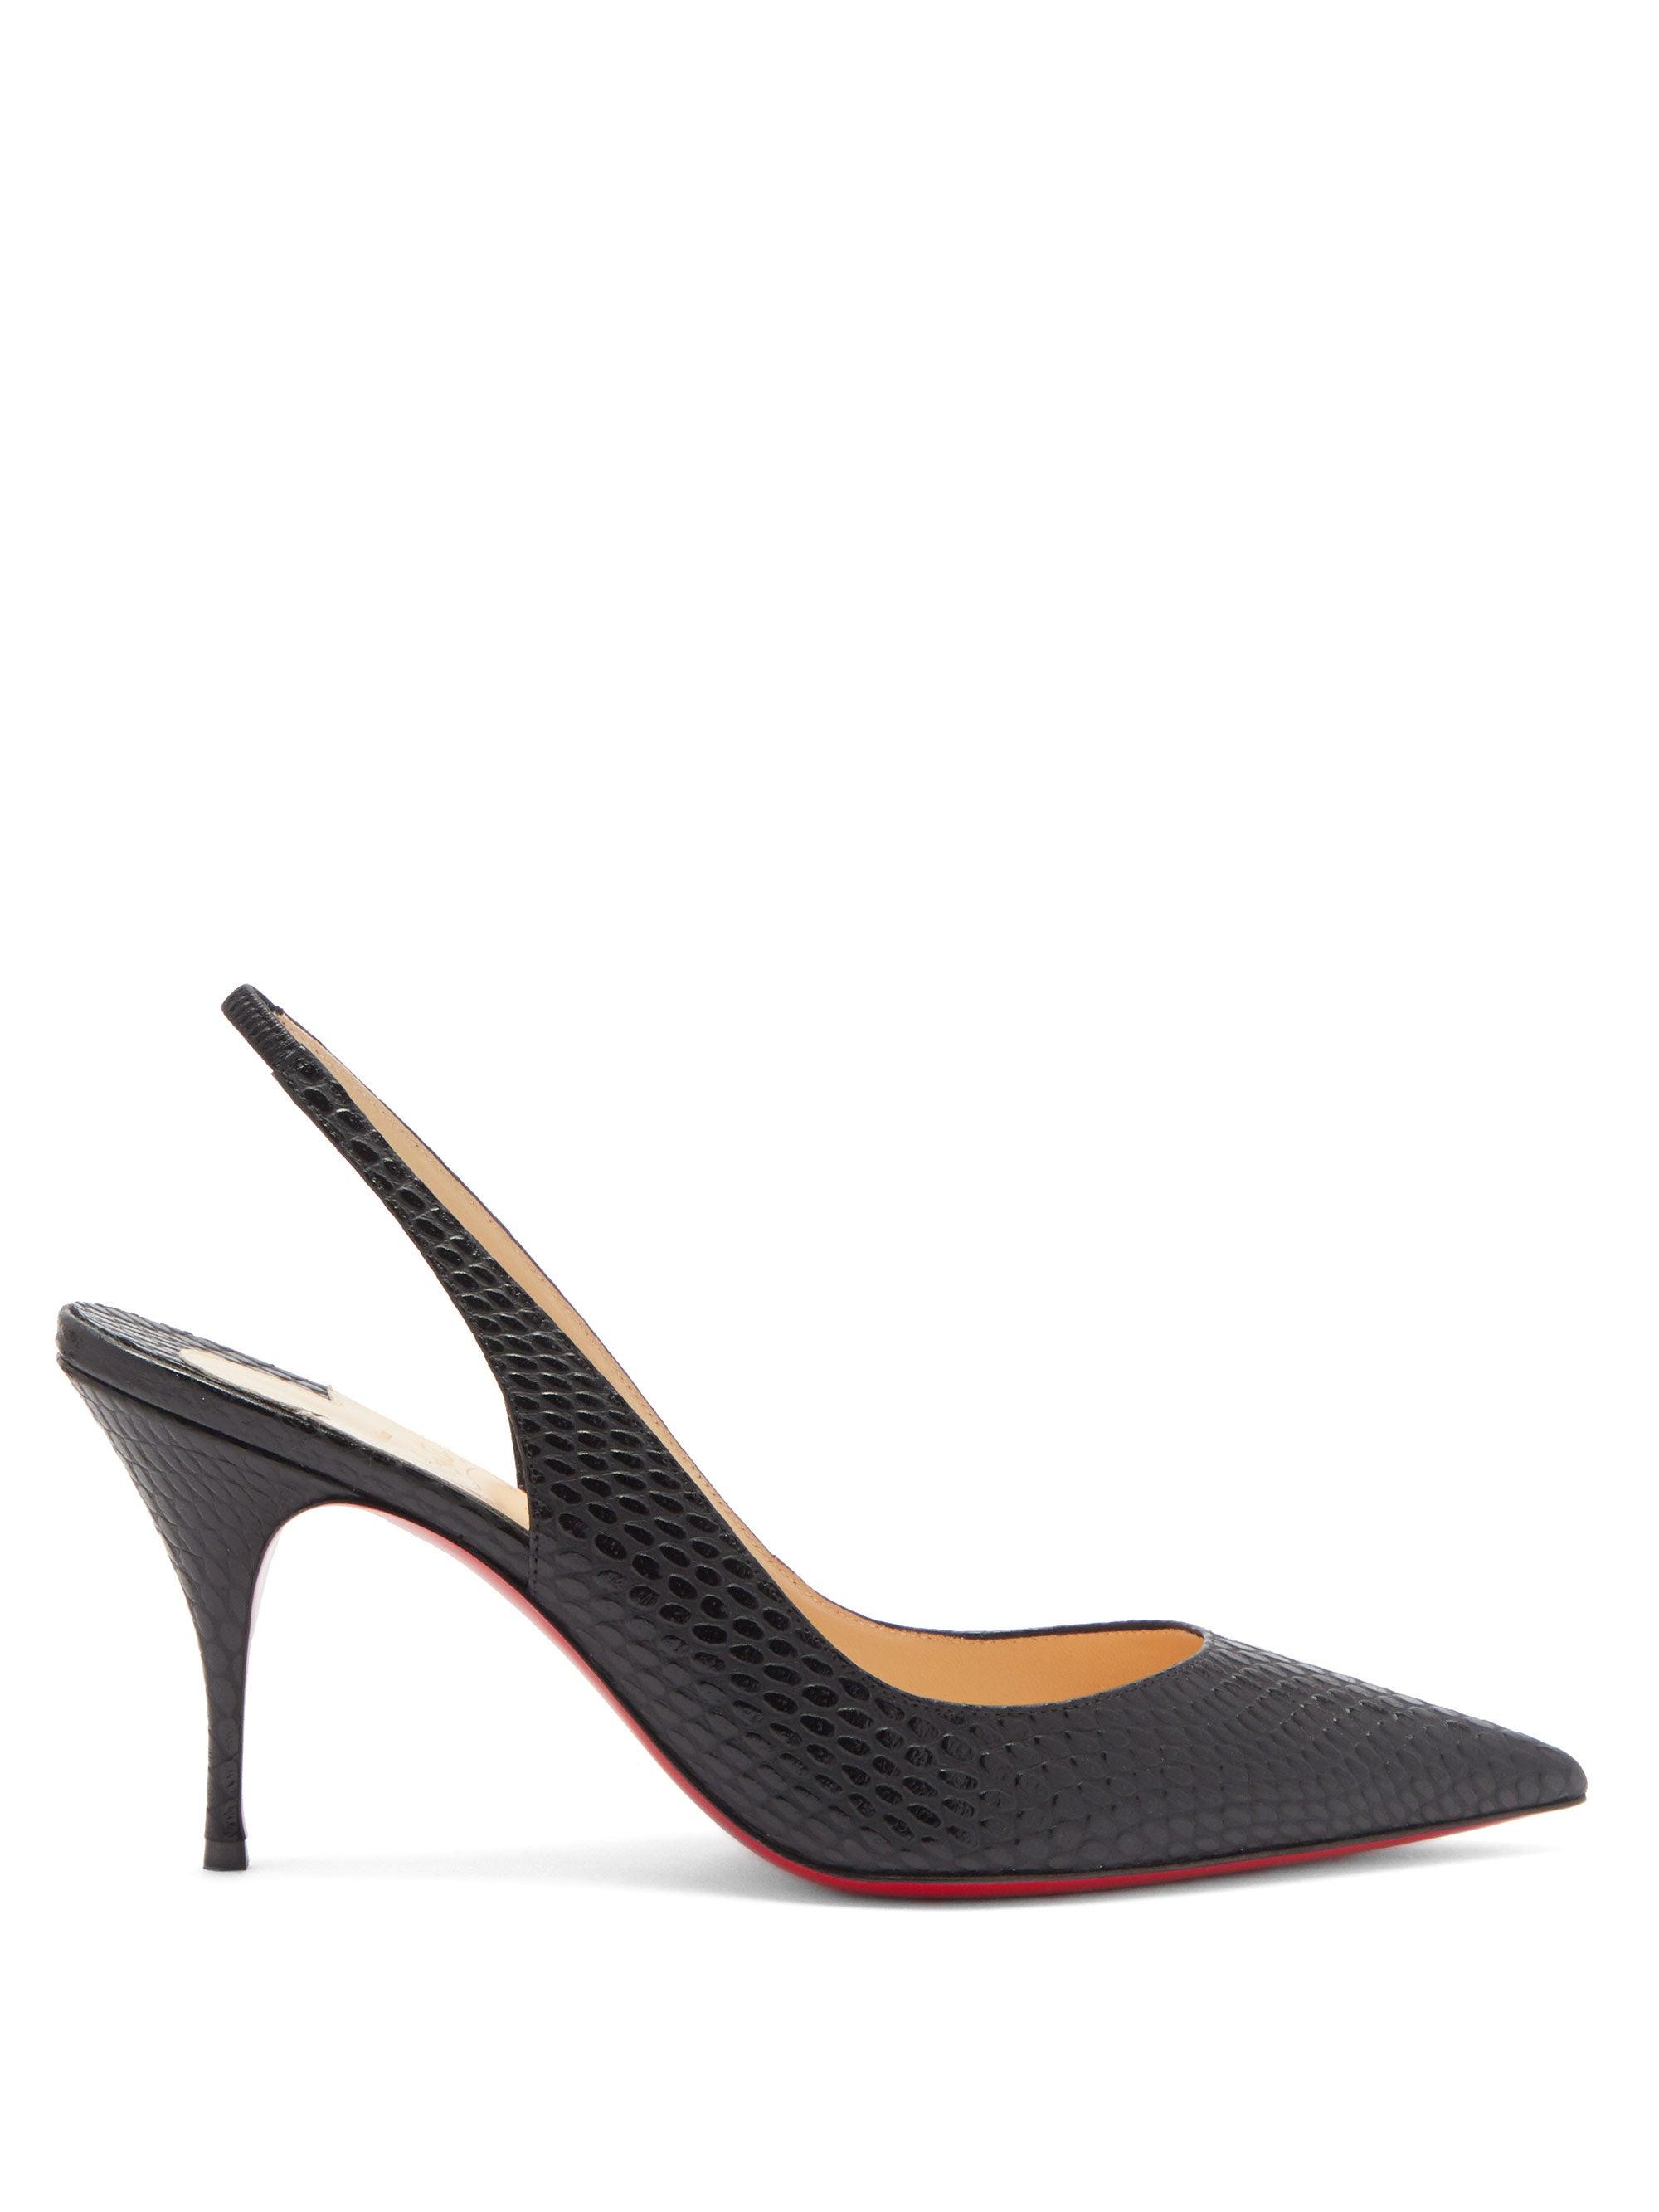 Christian Louboutin Clare Sling 80 Leather Slingback Pump in Black | Lyst